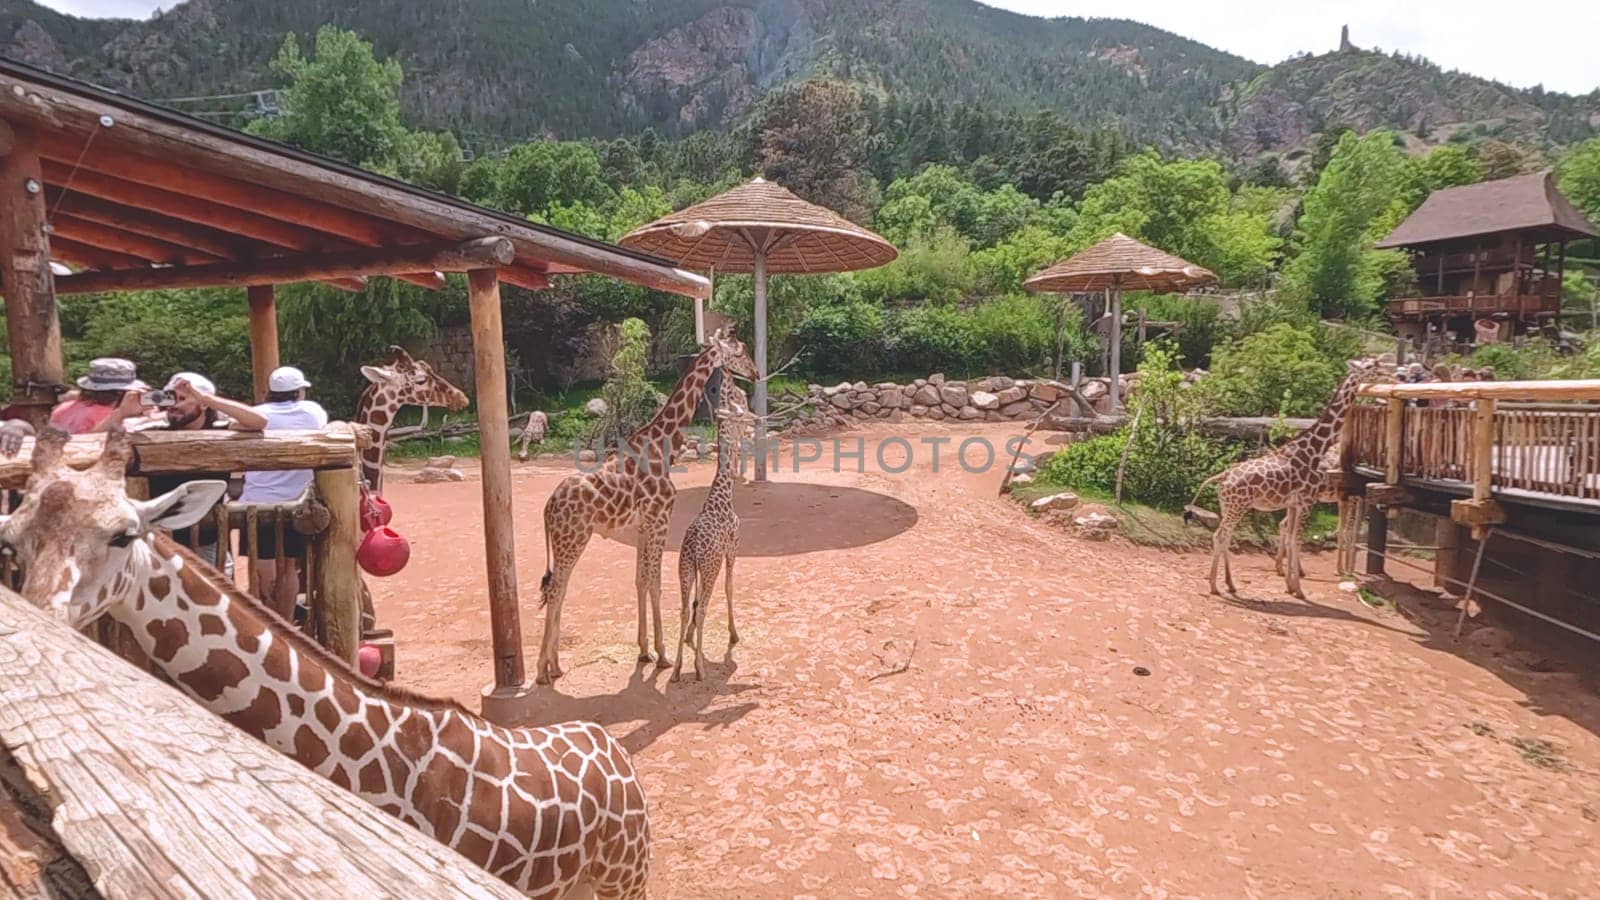 Colorado Springs, Colorado, USA-June 12, 2024-Slow motion-A lively scene at a zoo in Colorado Springs, Colorado, where visitors enjoy an interactive experience with giraffes. The setting includes a rustic wooden platform and feeding area, surrounded by picturesque mountain views and lush greenery. Families and tourists are seen engaging with the giraffes, creating an educational and memorable outing. The zoo thoughtful design integrates natural elements, enhancing the overall visitor experience and showcasing the beauty of wildlife.